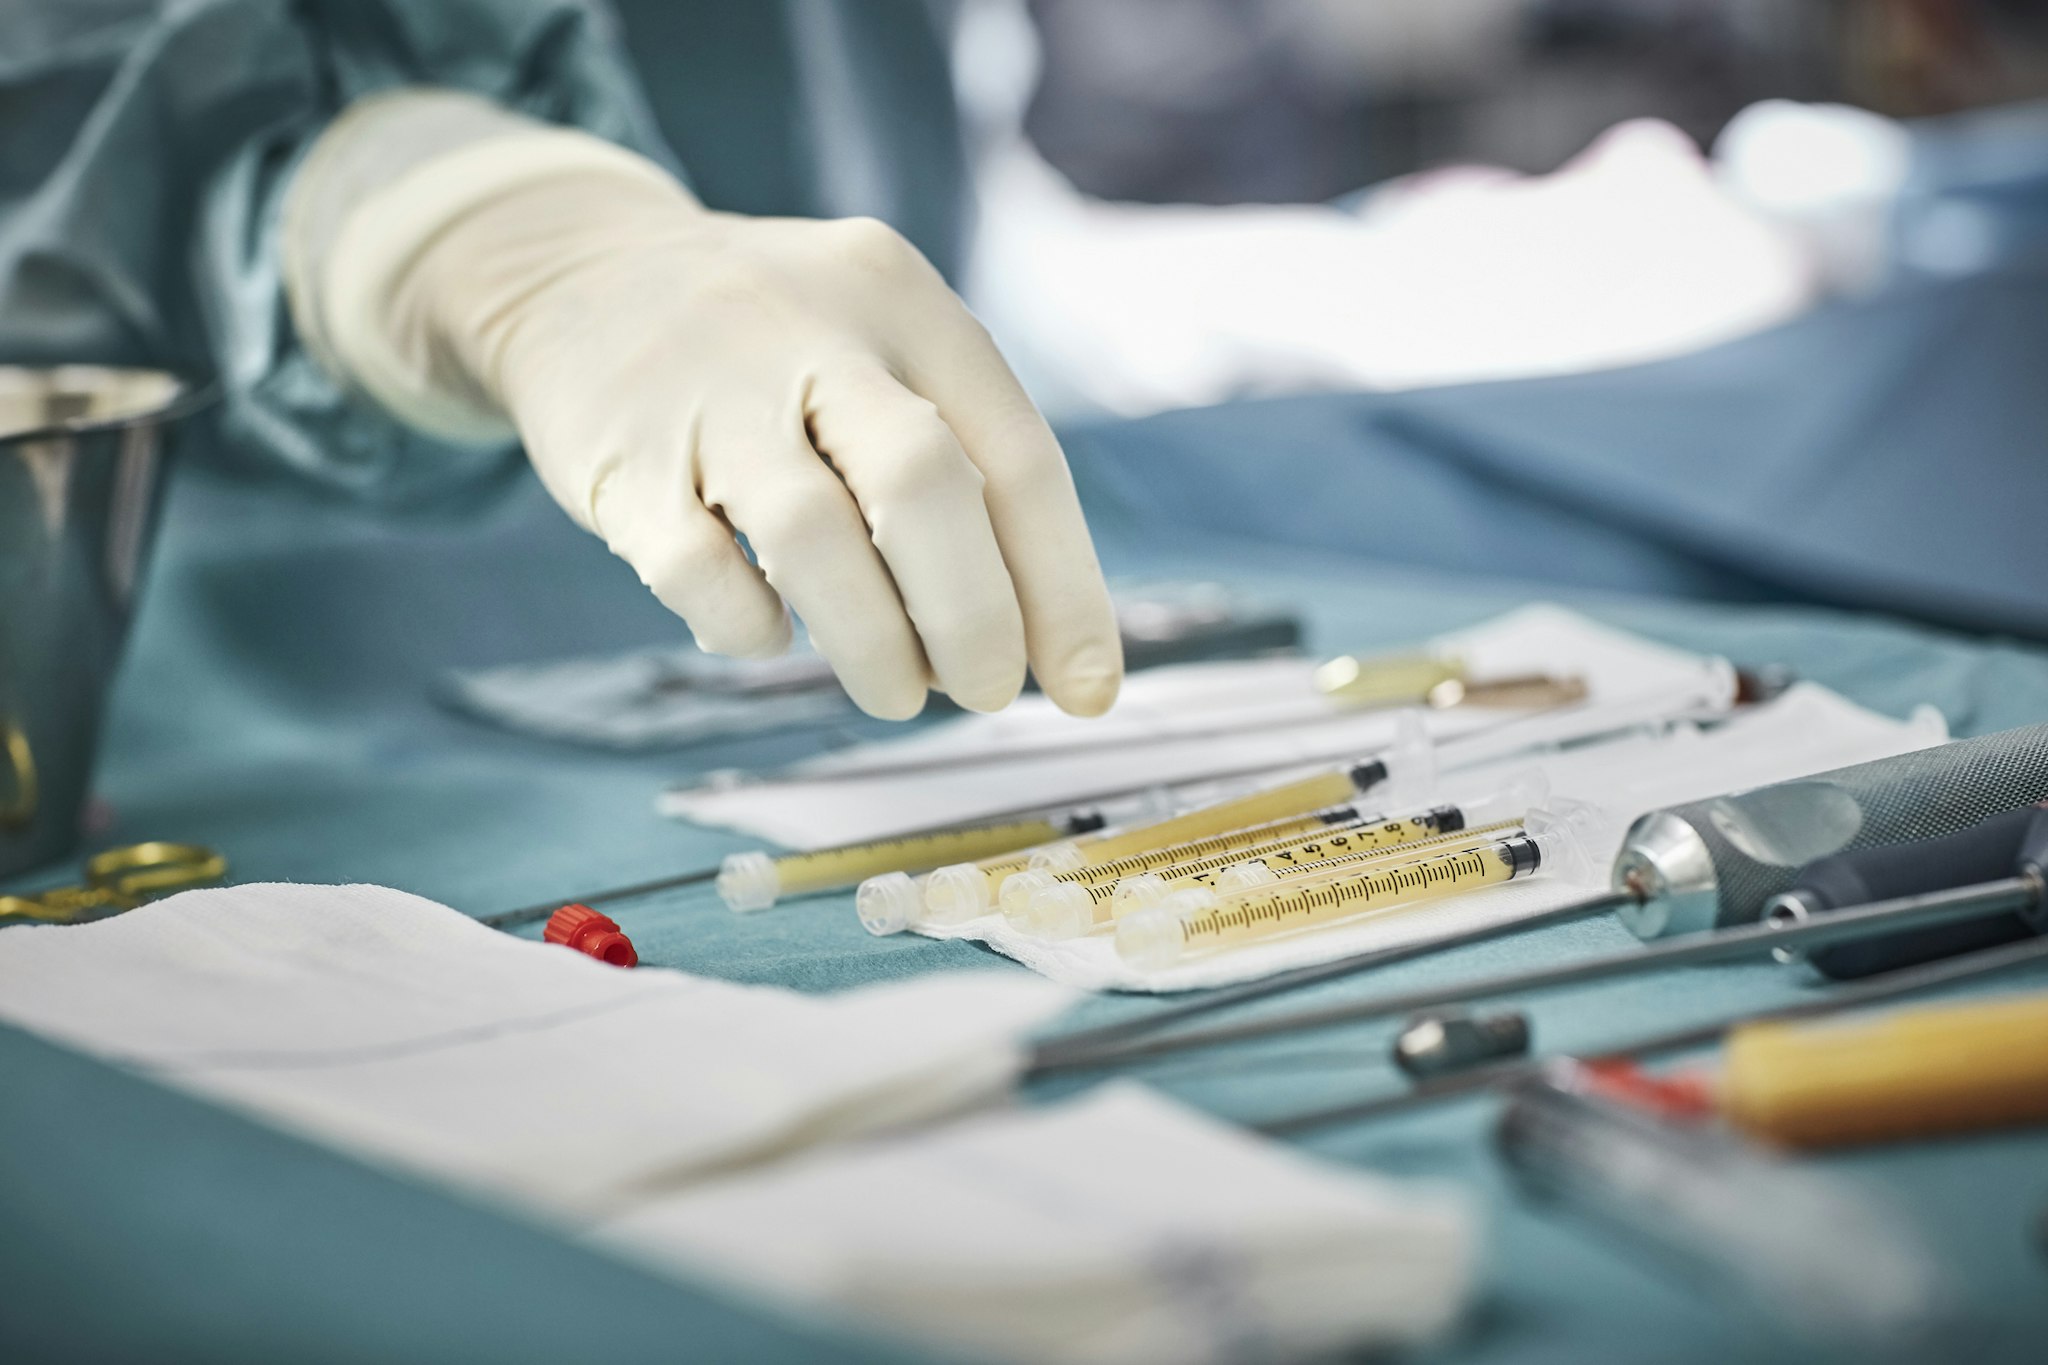 Cropped image of female surgeon reaching for syringes on table. Close-up of healthcare worker's hand wearing surgical glove. She is in emergency room.